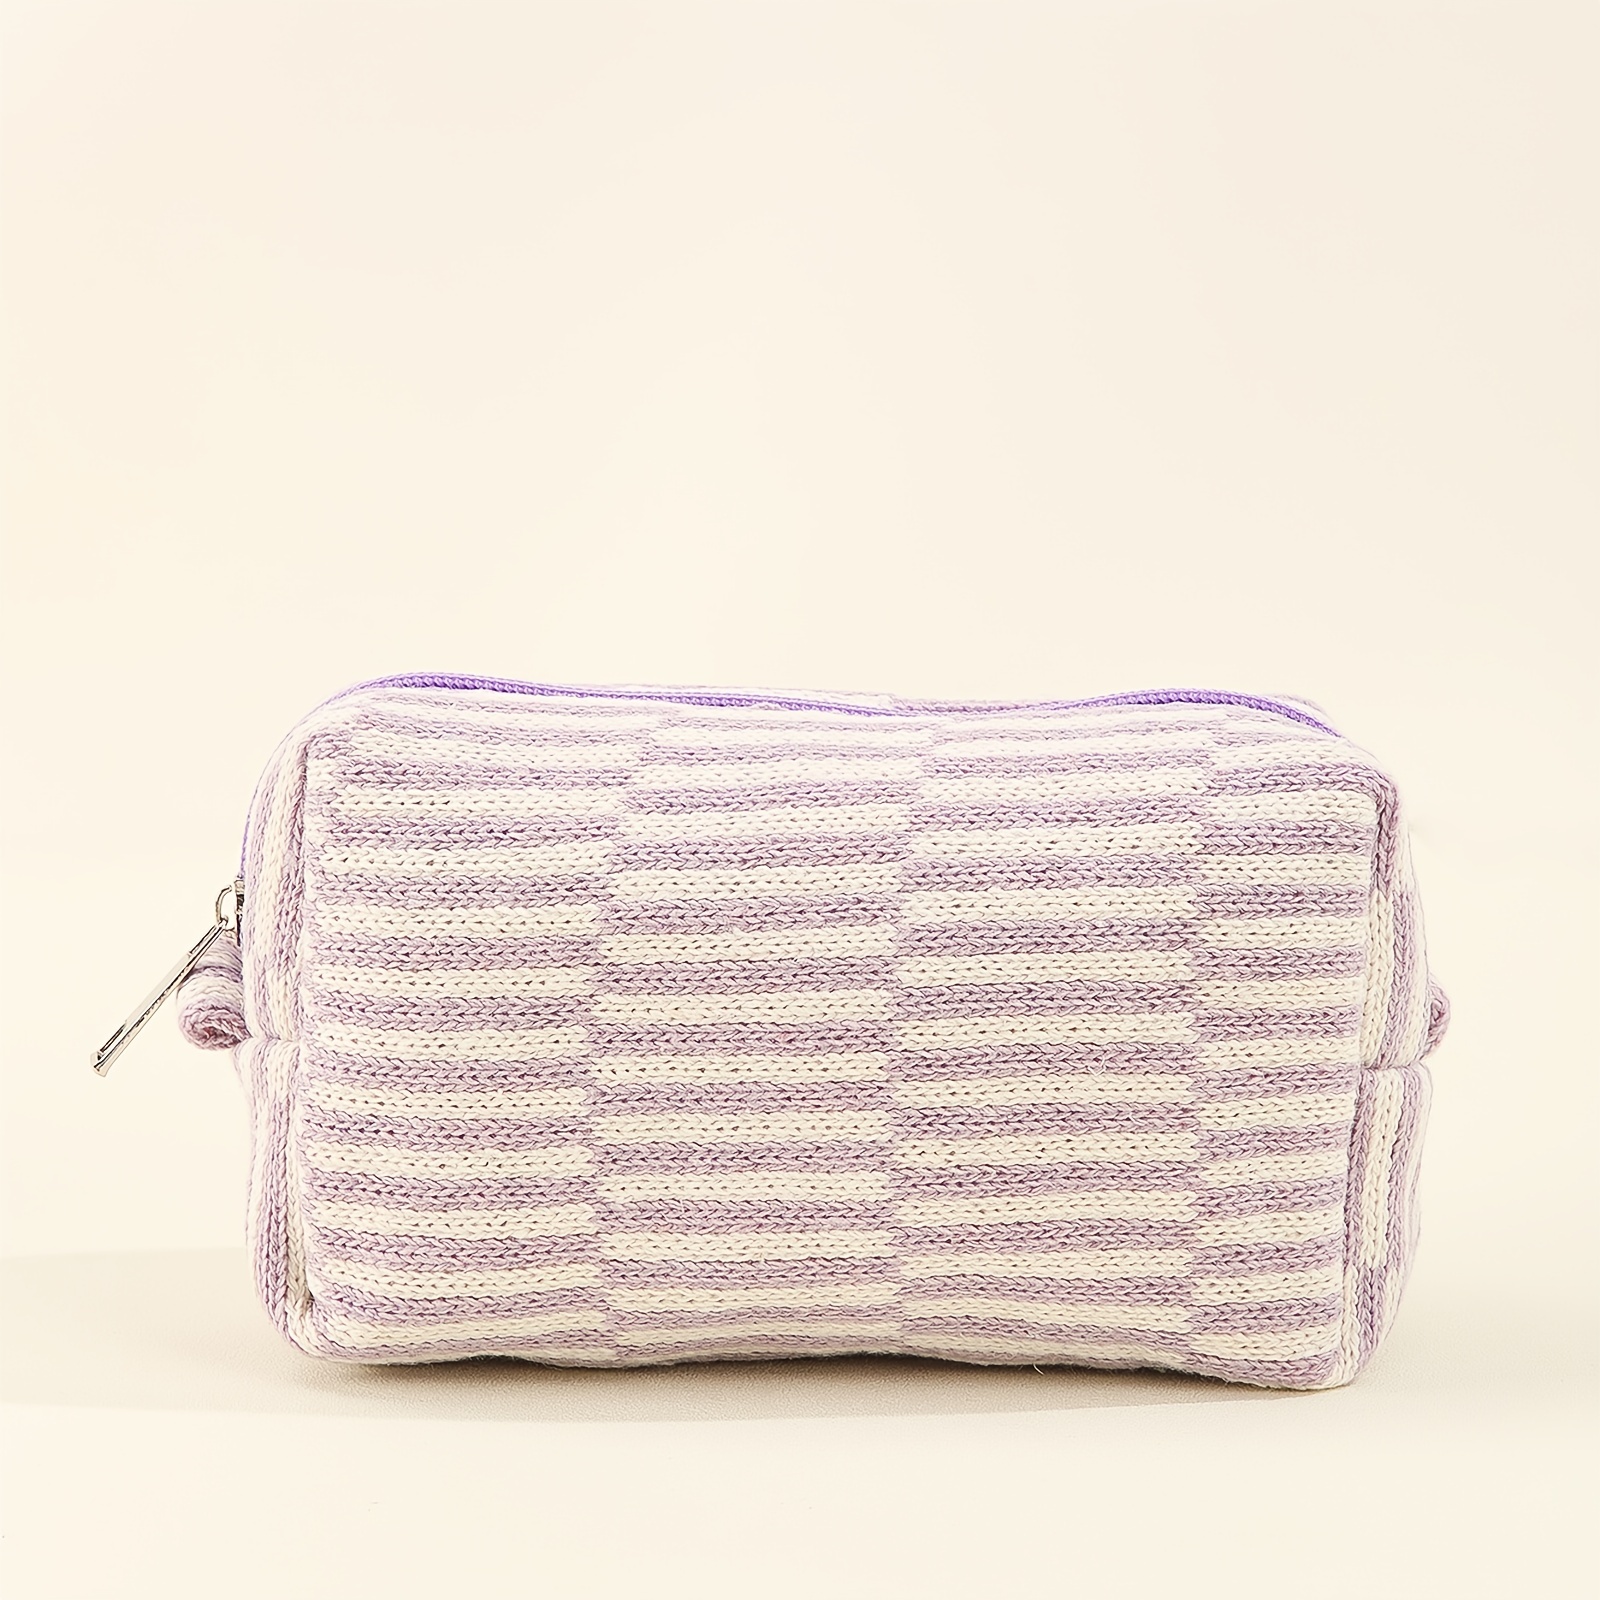 Knitted Cosmetic Bag, Knitted Pencil Case